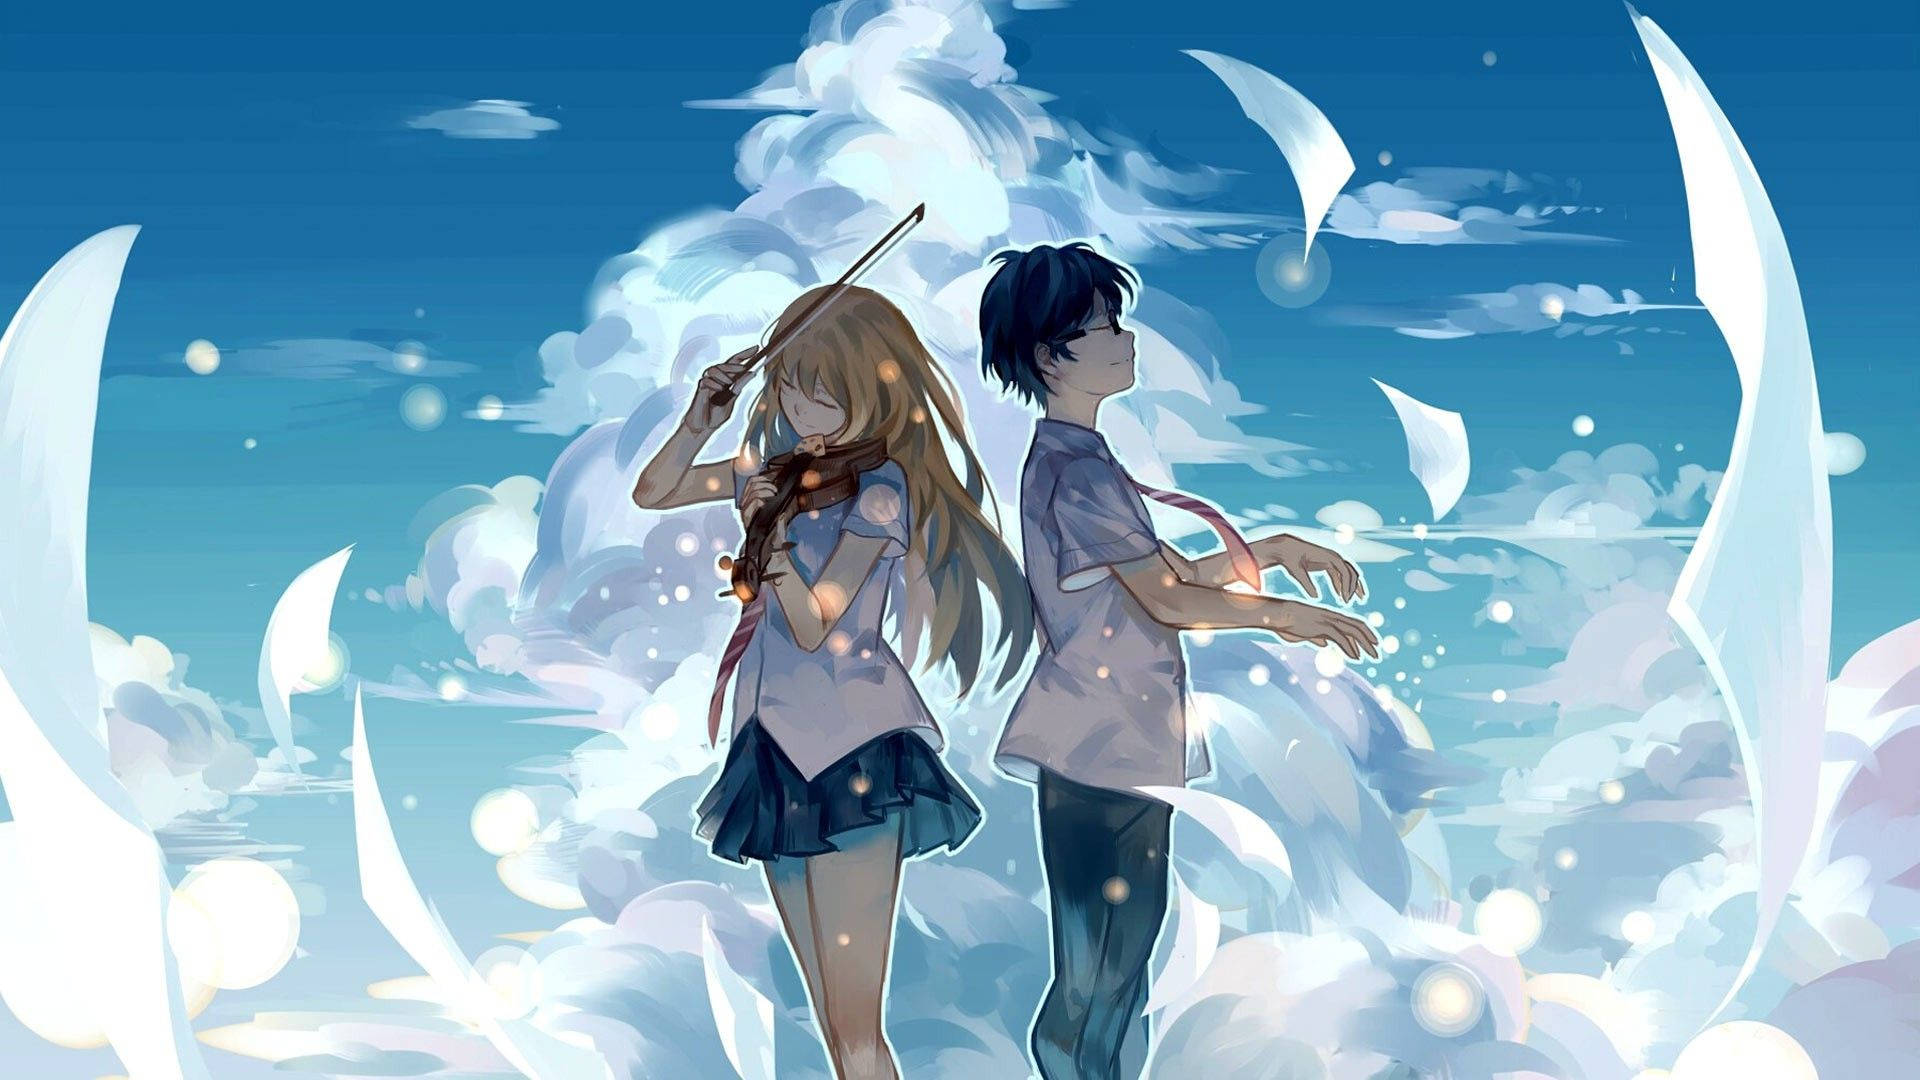 Love Anime Couple Your Lie In April Wallpaper